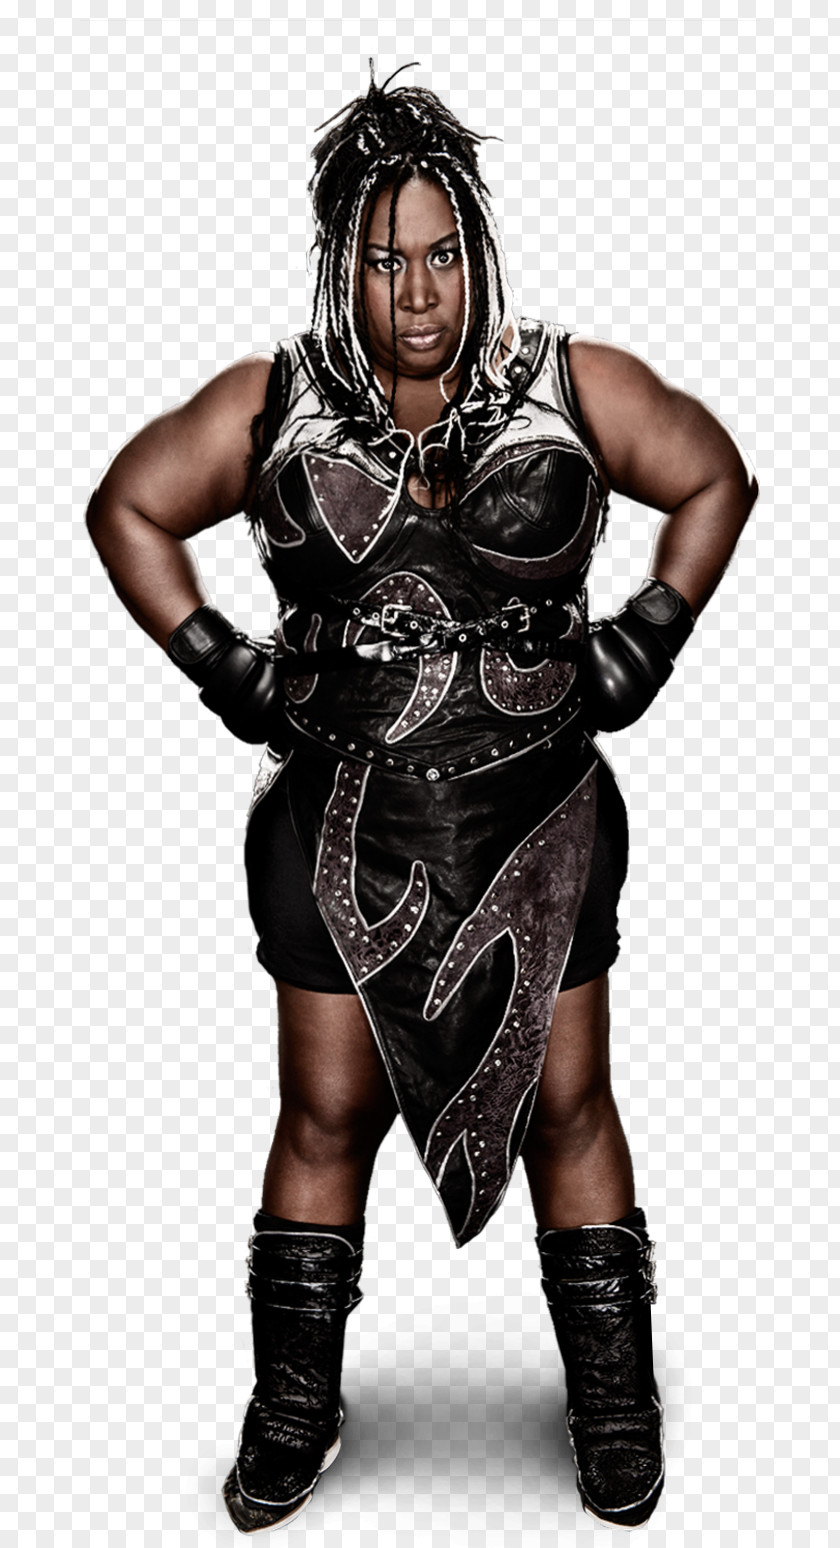 Kia Stevens WWE Superstars Royal Rumble Extreme Rules Women In PNG in WWE, seth rollins clipart PNG